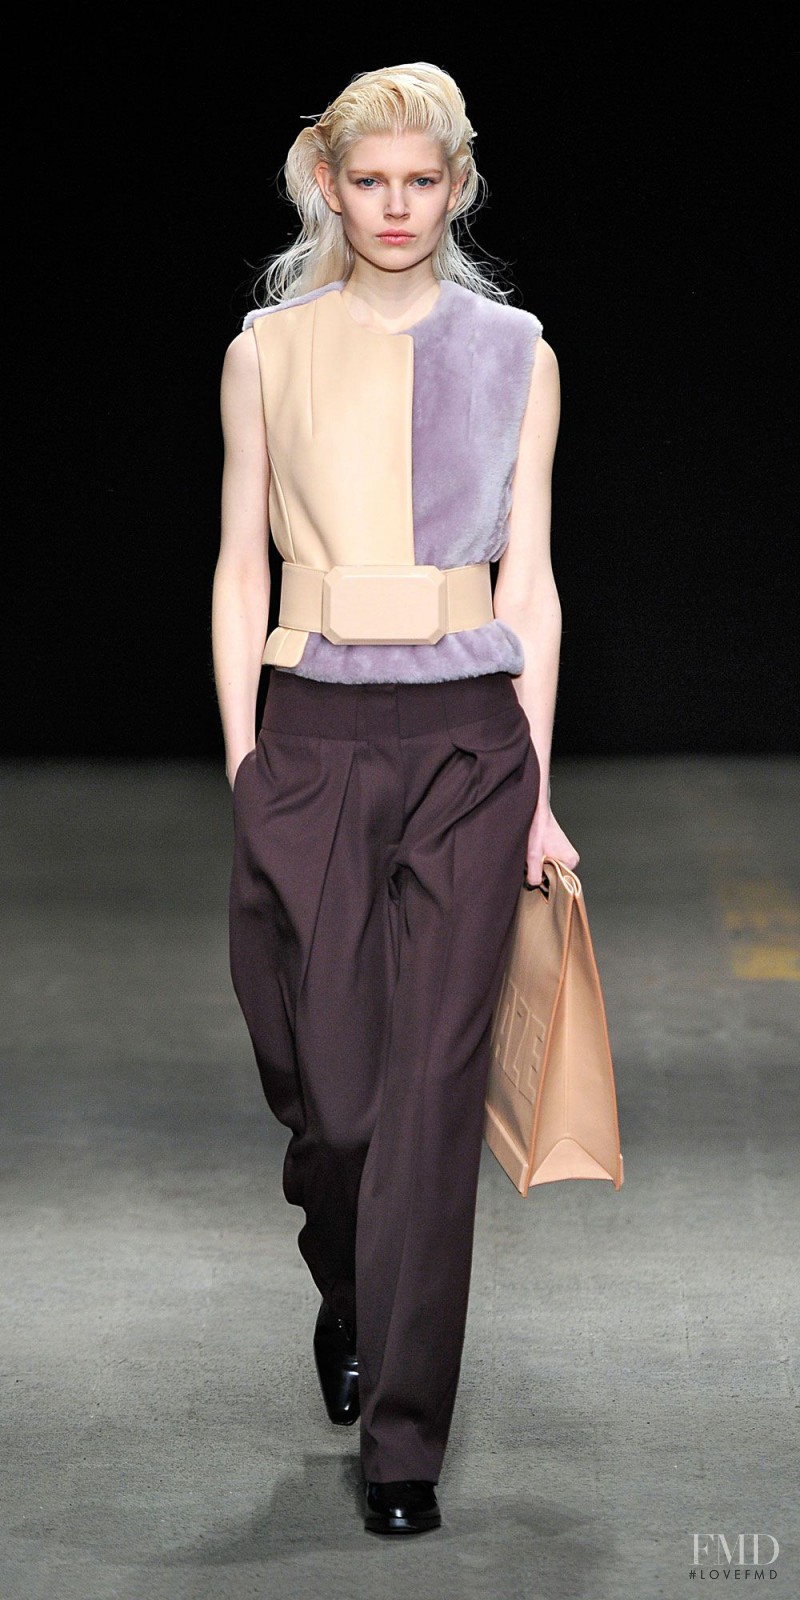 Ola Rudnicka featured in  the 3.1 Phillip Lim fashion show for Autumn/Winter 2014